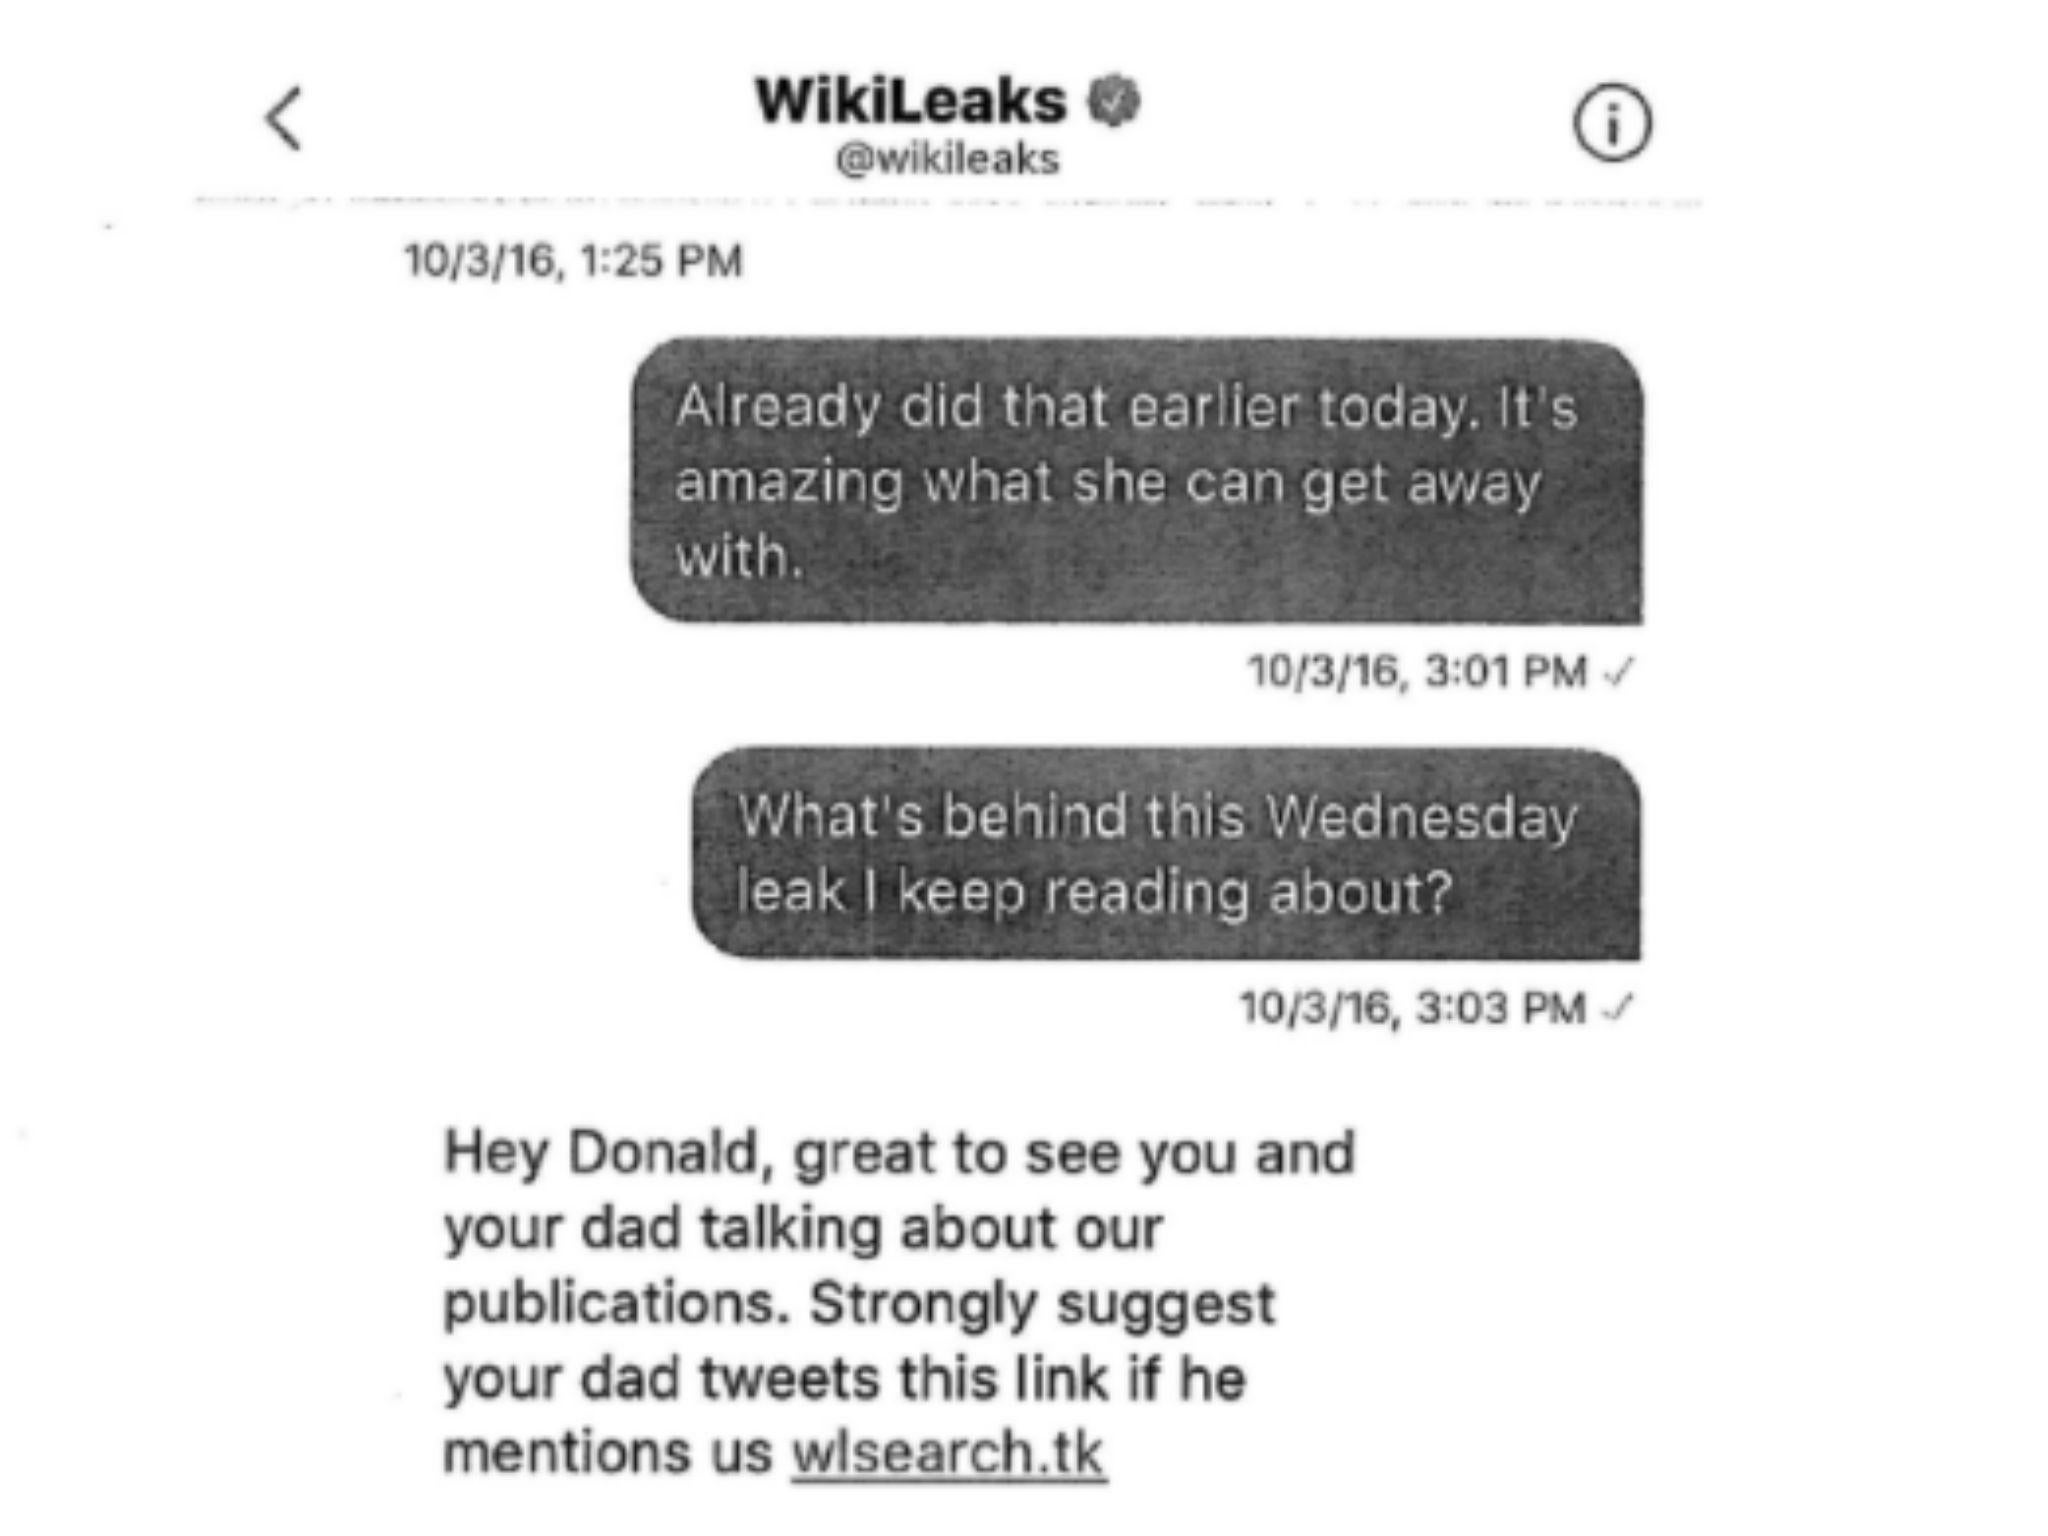 A screenshot from part of Donald Jr and Wikileaks' correspondence